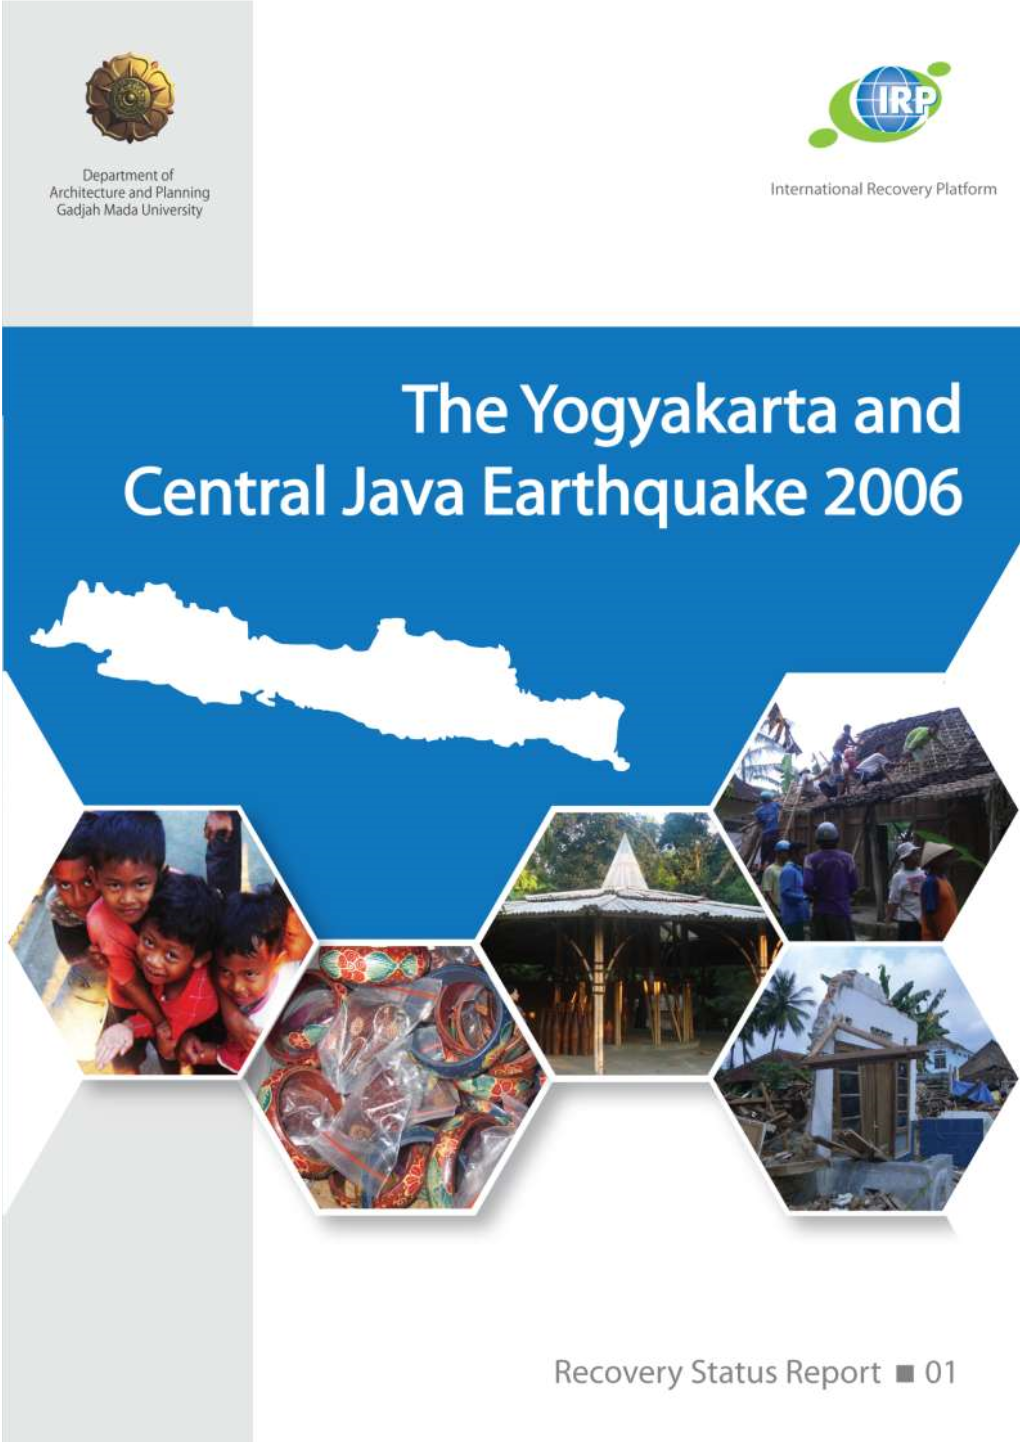 Recovery Status Report: the Yogyakarta and Central Java Earthquake 2006 Was Developed As Collaboration Between